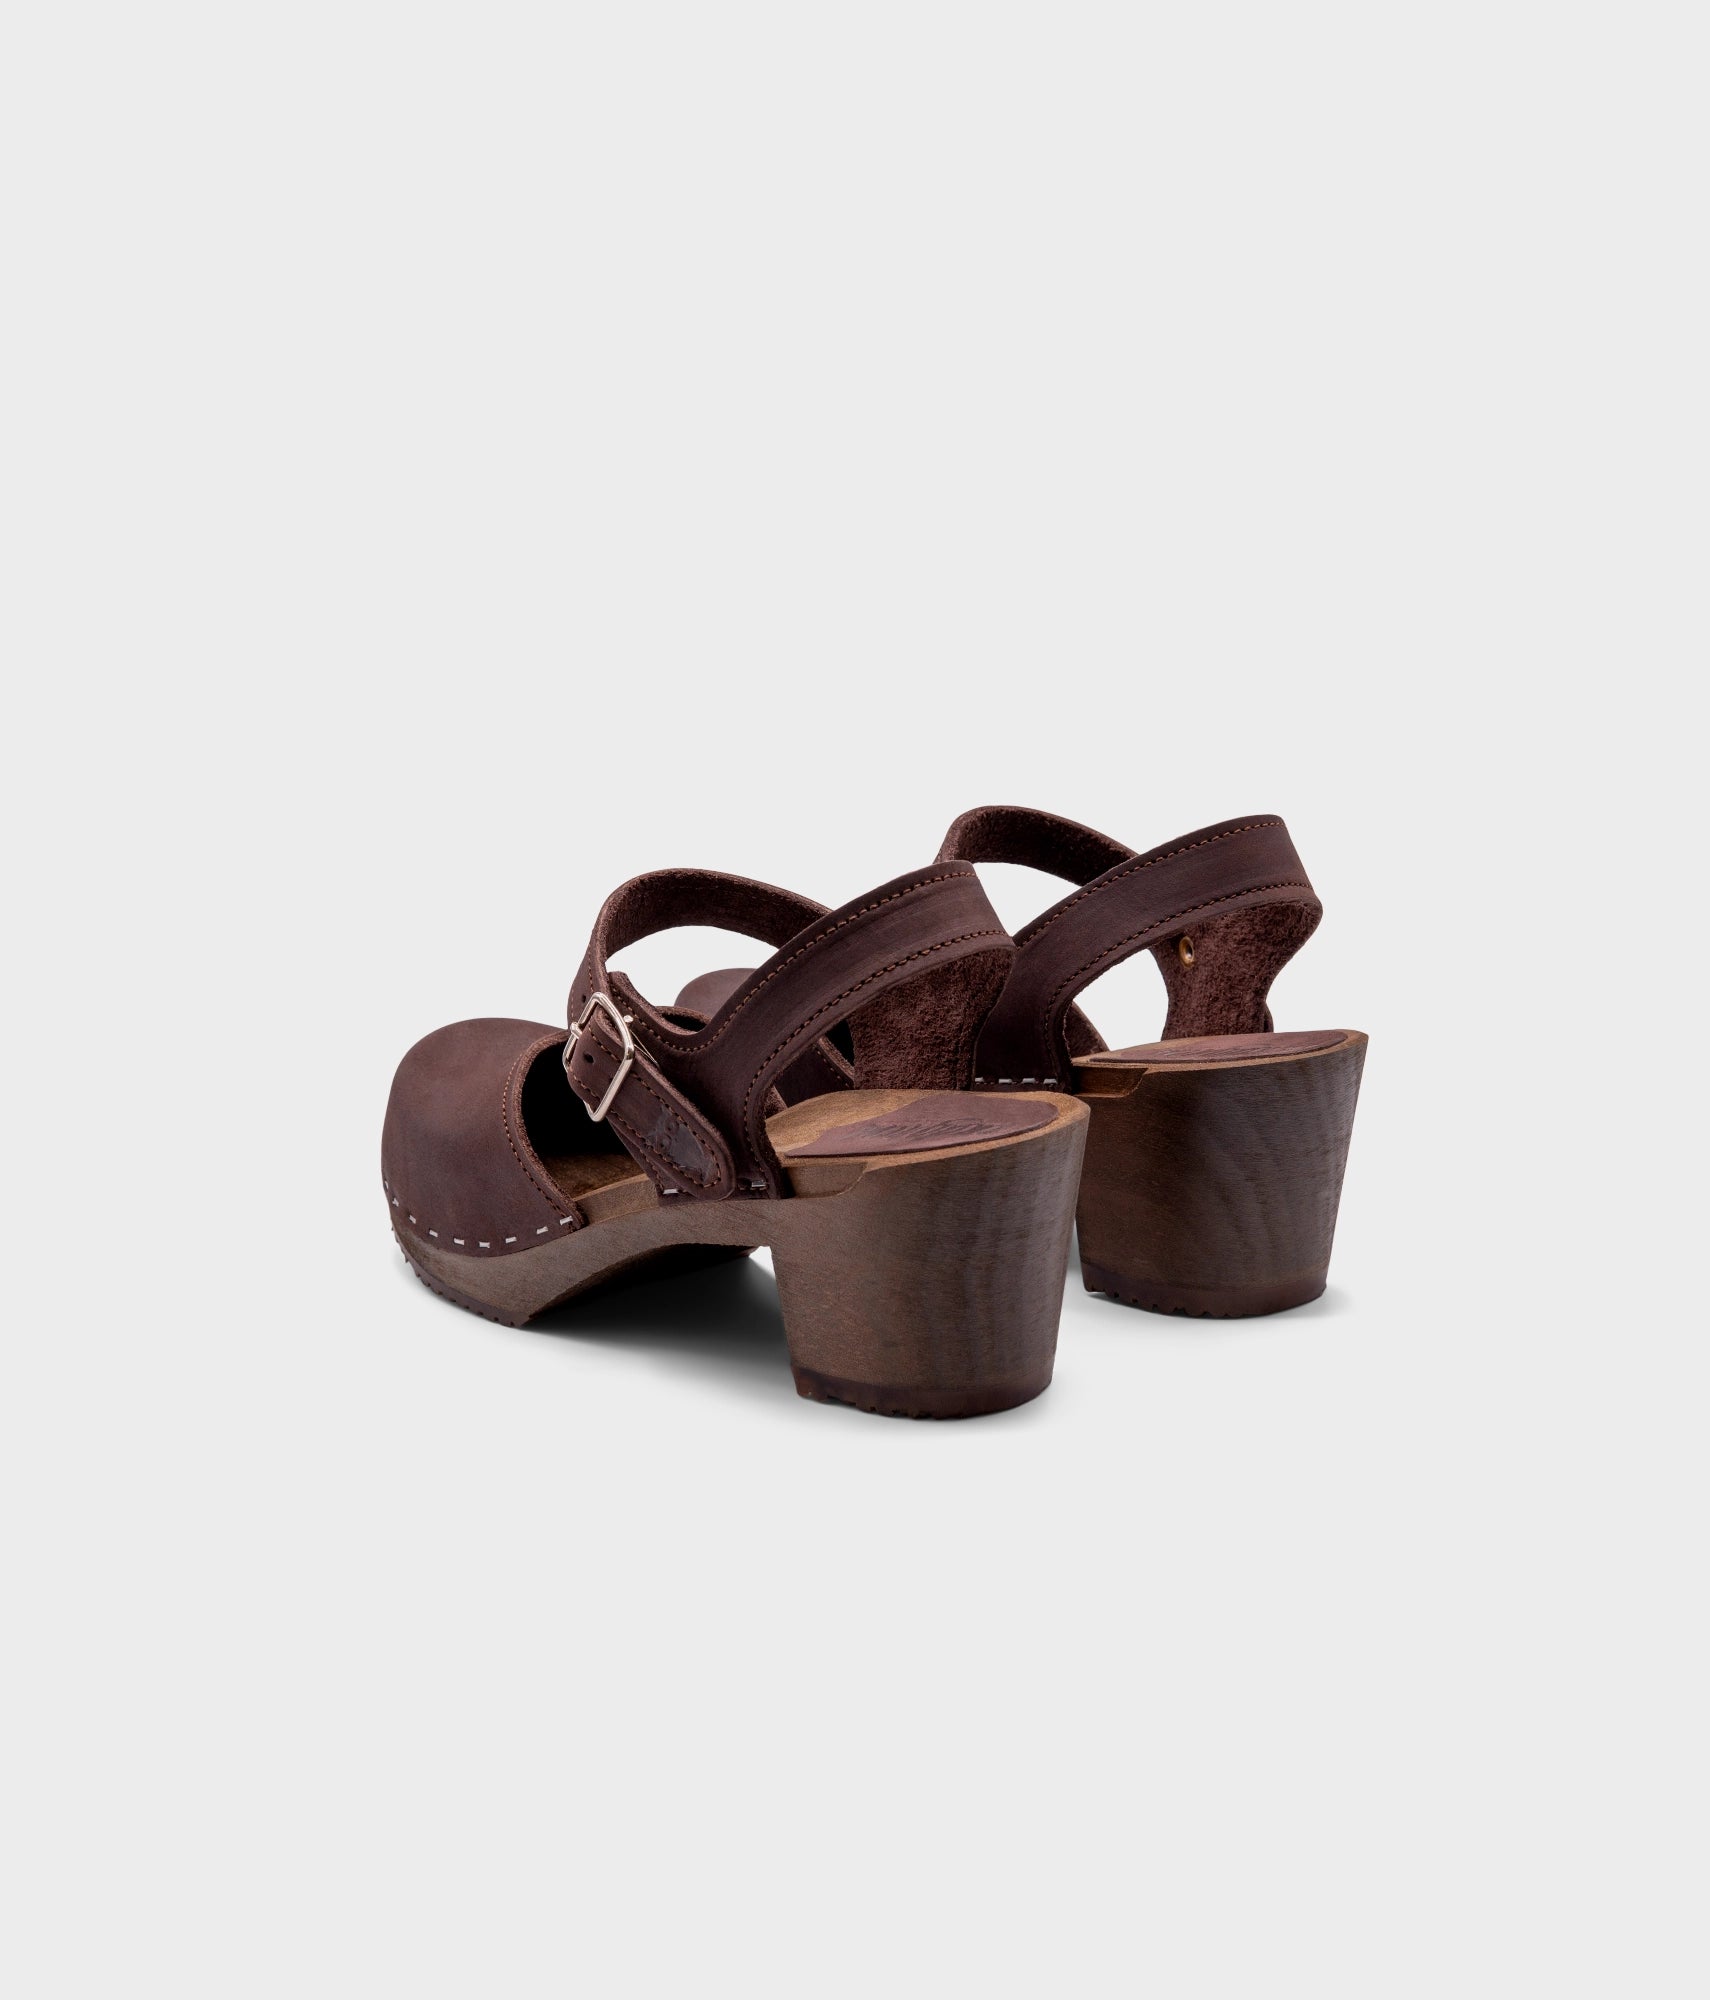 high heeled closed-toe clog sandal in dark brown nubuck leather stapled on a dark wooden base